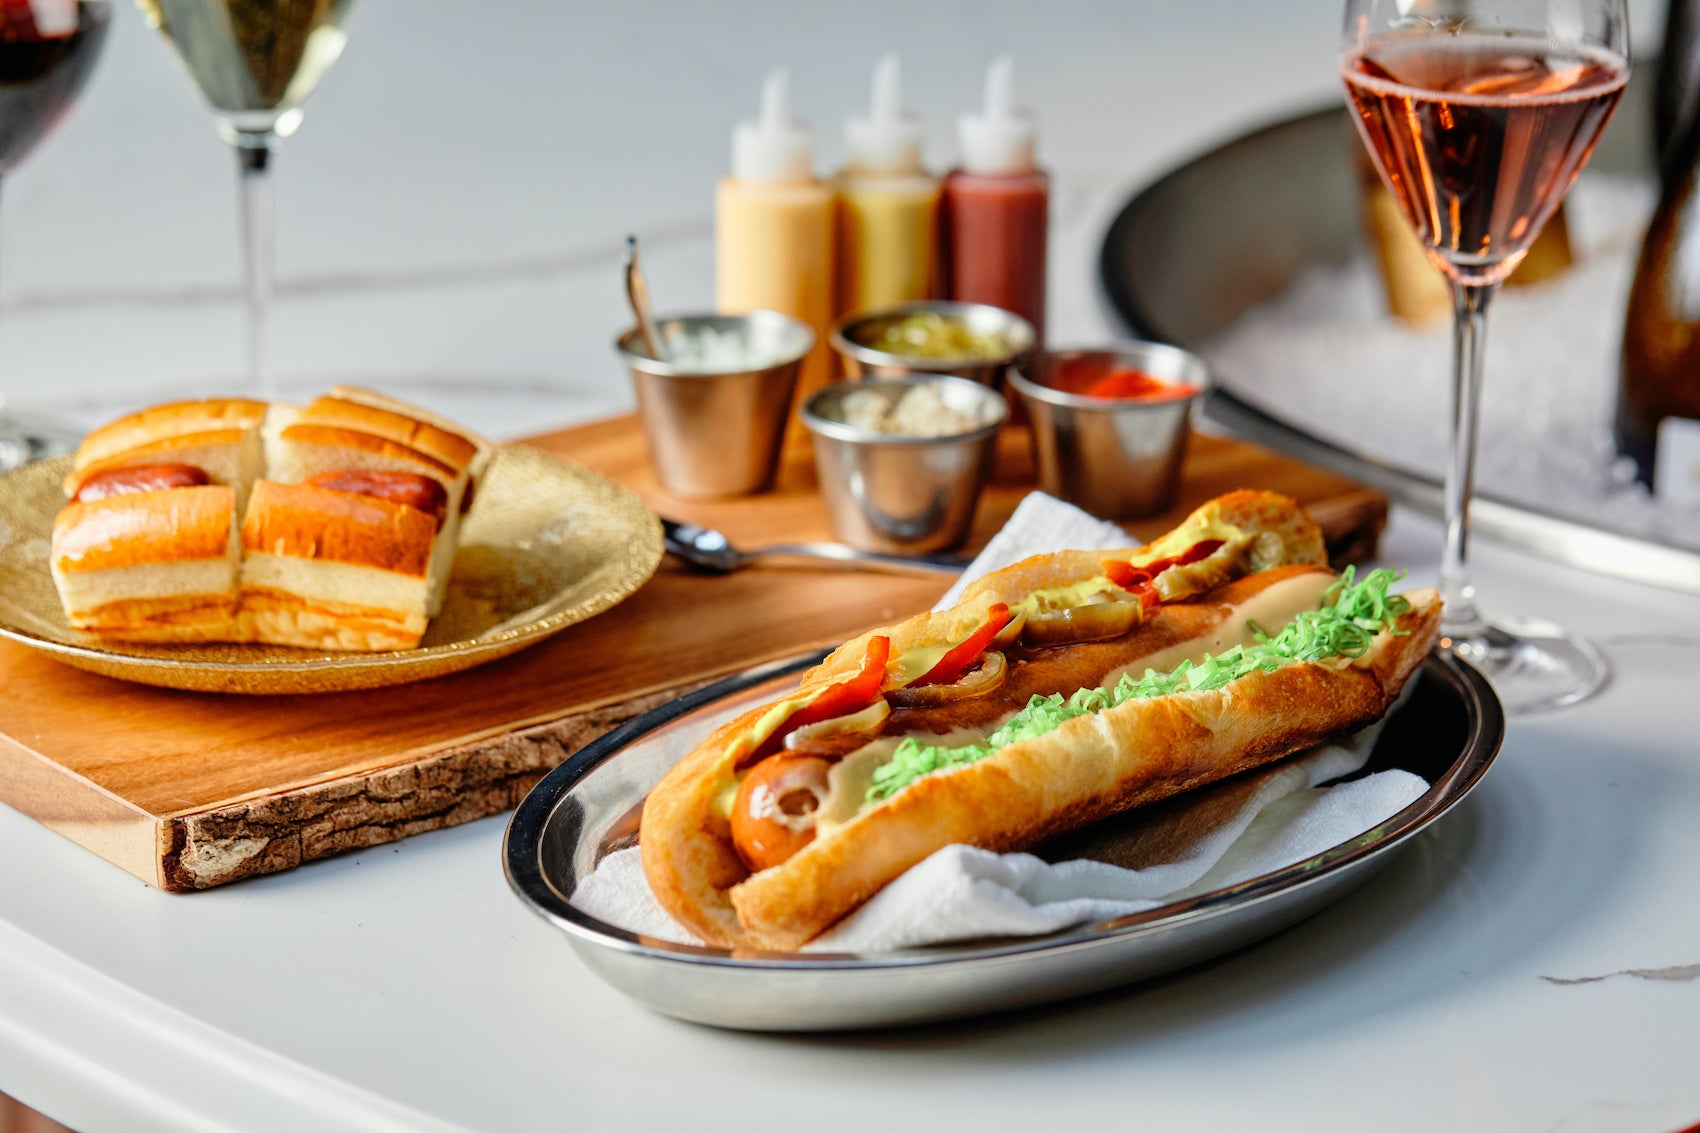 Hot dogs and wine from Bubble Bath at High Street Place.